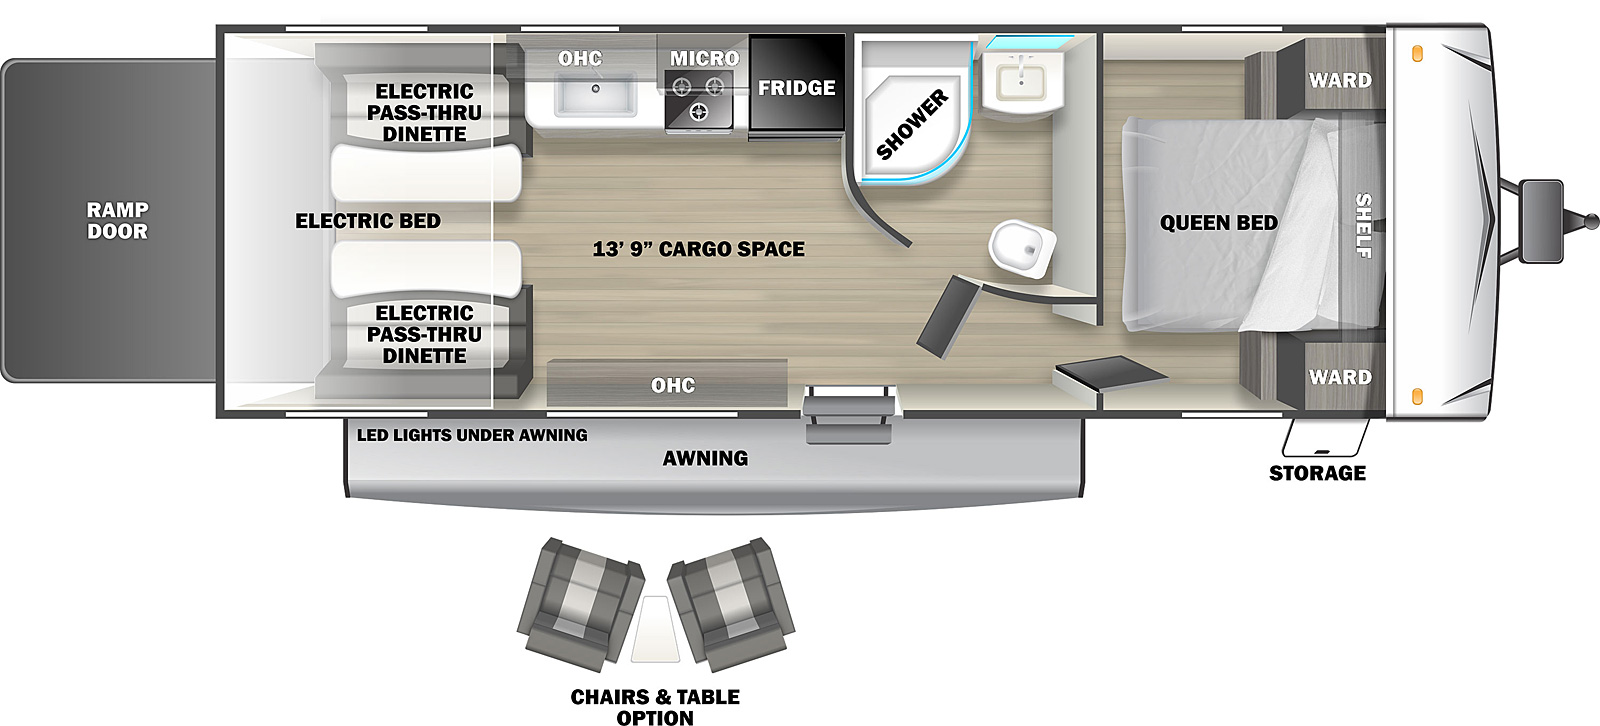 The 242SLC Toy Hauler has one entry door, a rear ramp door, and an electric awning. Storage access is available in he front door side exterior. The RV has a 13 foot 9 inch cargo space. The RV has a 13 foot 9 inch cargo area. The entry door leads to a living area on the left and a hallway on the right. Directly to the left of the entry door are overhead storage cabinets. A dinette and table are in the rear door side of the RV. A ramp door makes up the rear wall of the RV. A dinette and table are in the rear off door corner of the RV. A kitchen area is to the right of the off door side dinette. The kitchen has a countertop with a sink and a stove. Overhead storage is above the sink and a microwave is above the stove. A refrigerator is to the right of the stove. A hallway is to the right of the entry door. A door on the left leads to the bathroom. The bathroom has a shower, sink, and toilet. A door straight ahead in the hallway leads to the bedroom in the front of the RV. The bedroom has a queen bed with a shelf above it. Night stands and wardrobes are on the right and left of the queen bed.